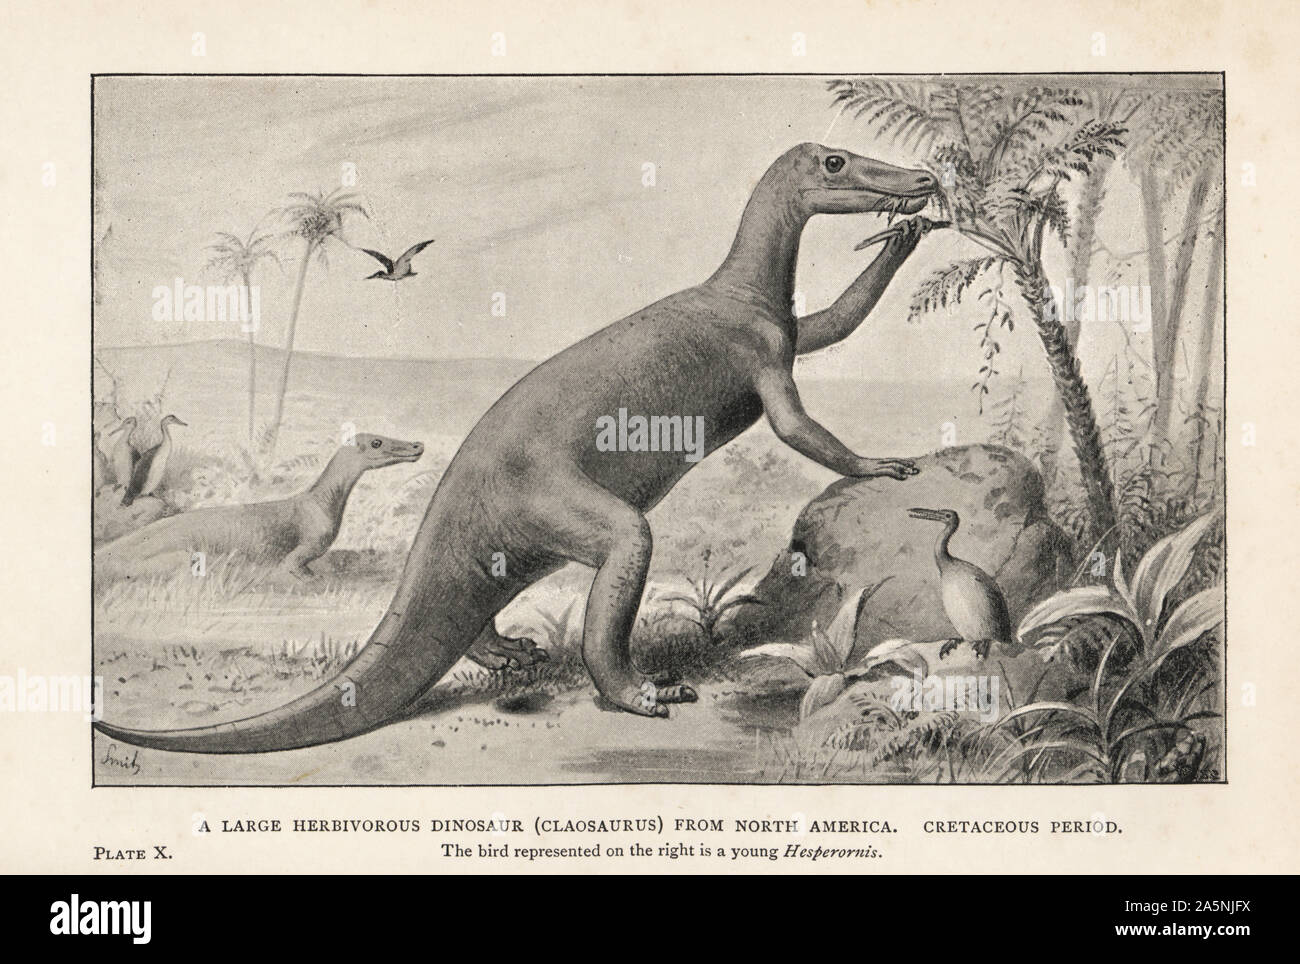 A large herbivorous dinosaur, Claosaurus, from North America, Cretaceuous Period. The bird on the right is a young Hesperornis regalis. Print after an illustration by Joseph Smit from Henry Neville Hutchinson’s Creatures of Other Days, Popular Studies in Palaeontology, Chapman and Hall, London, 1896. Stock Photo